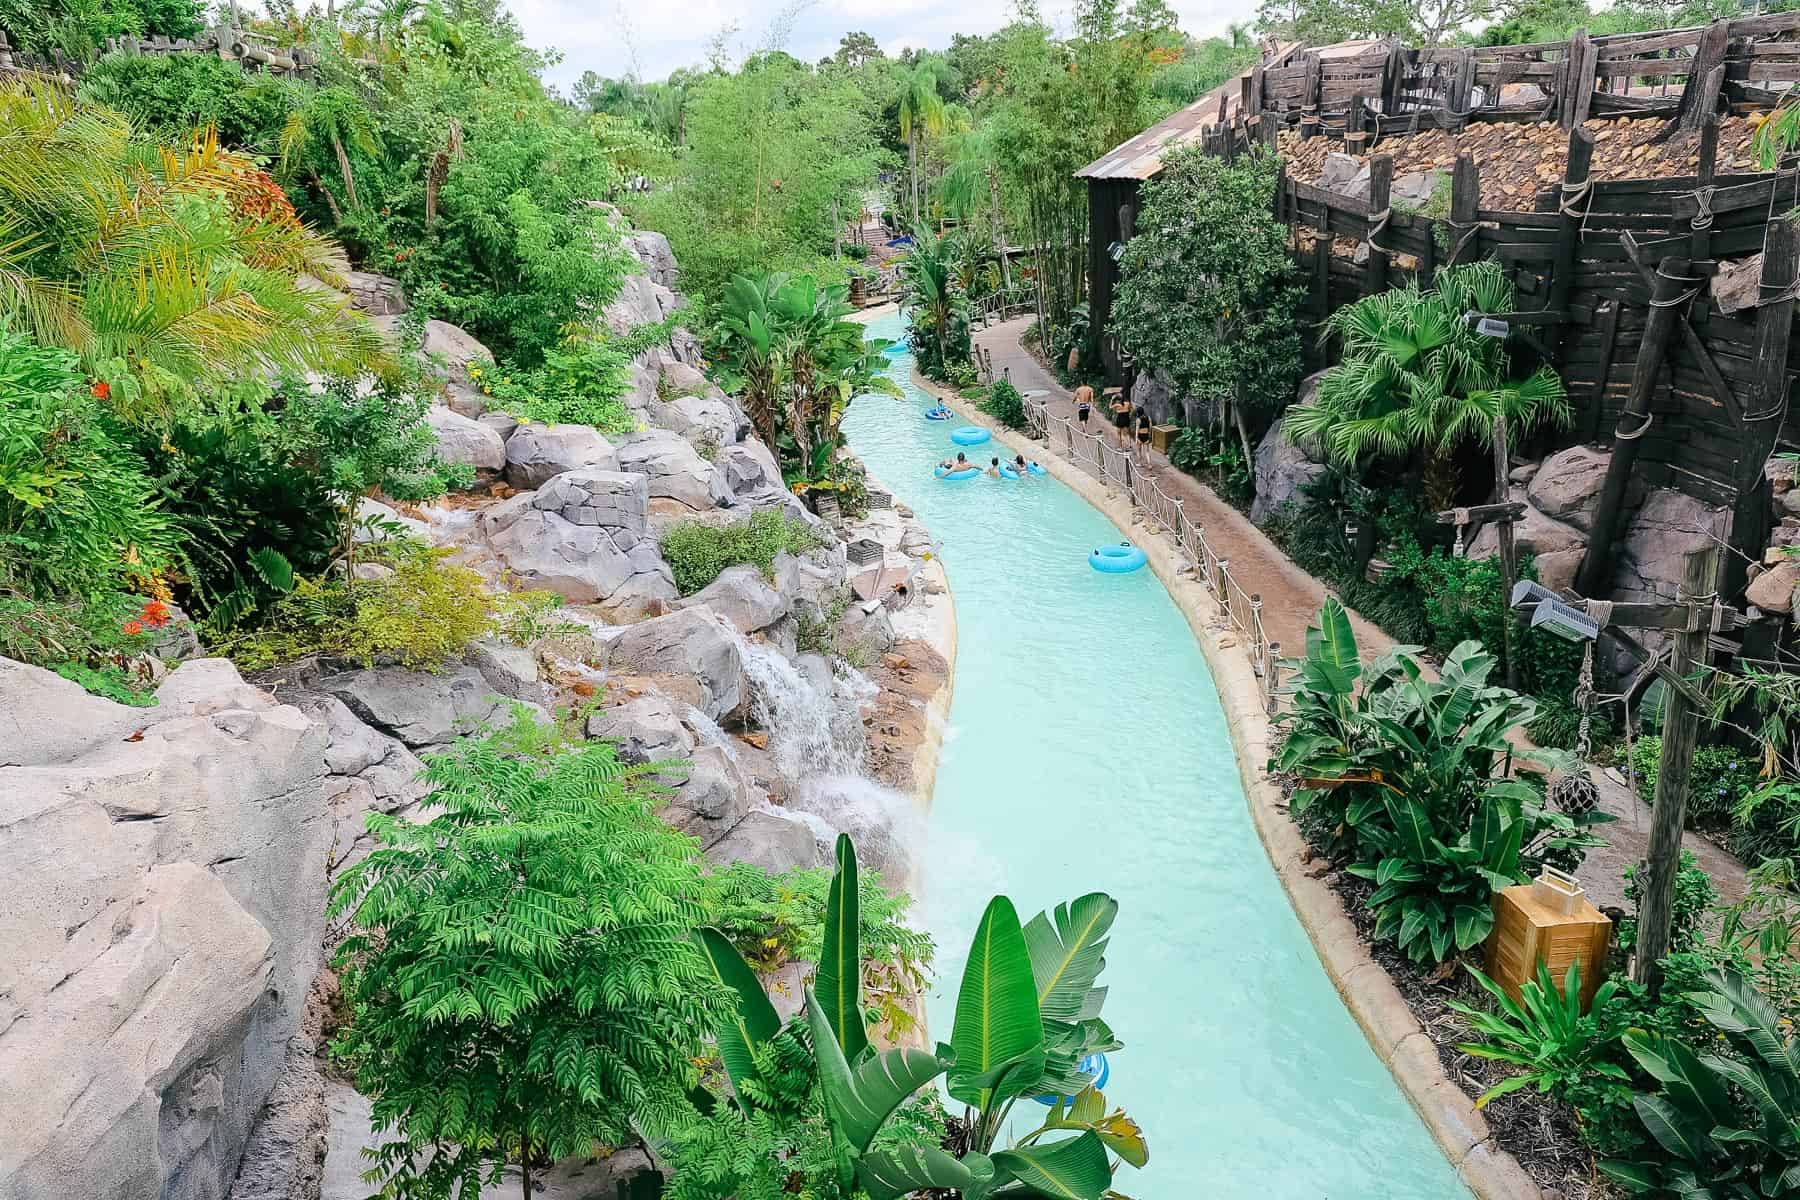 the lazy river at Disney's Water Park. Typhoon Lagoon